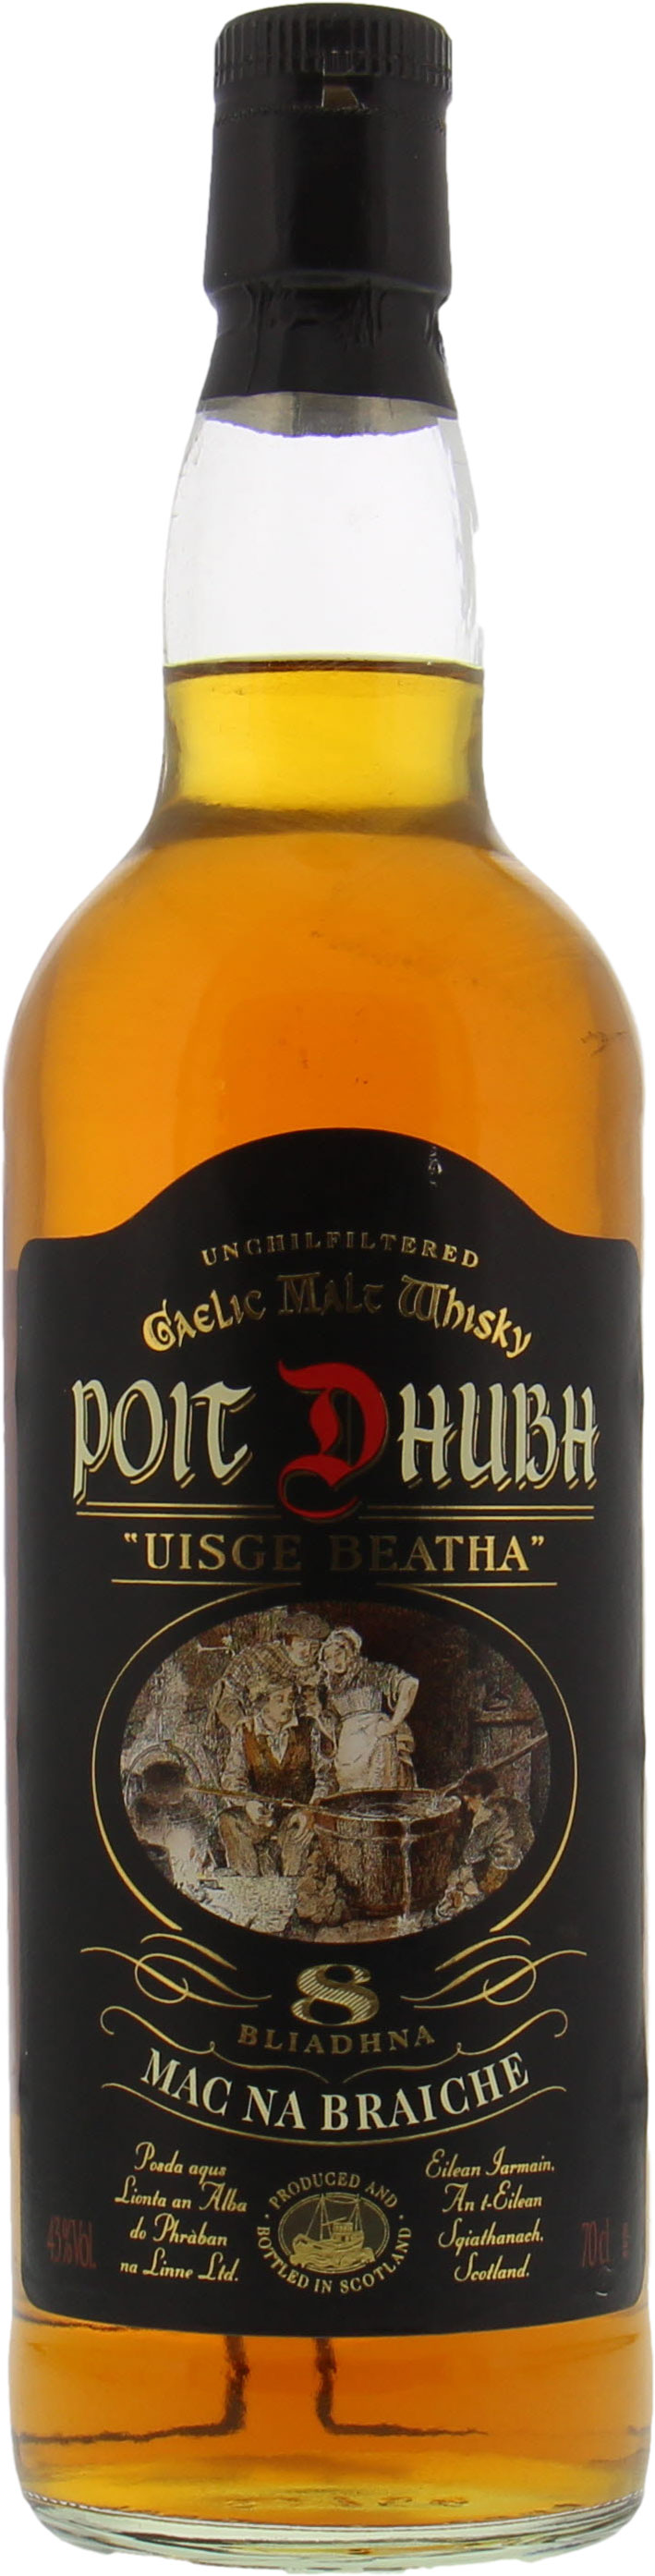 Poit Dhubh - Mac na braiche 8 Years Old 43% NV No Original Container Included!